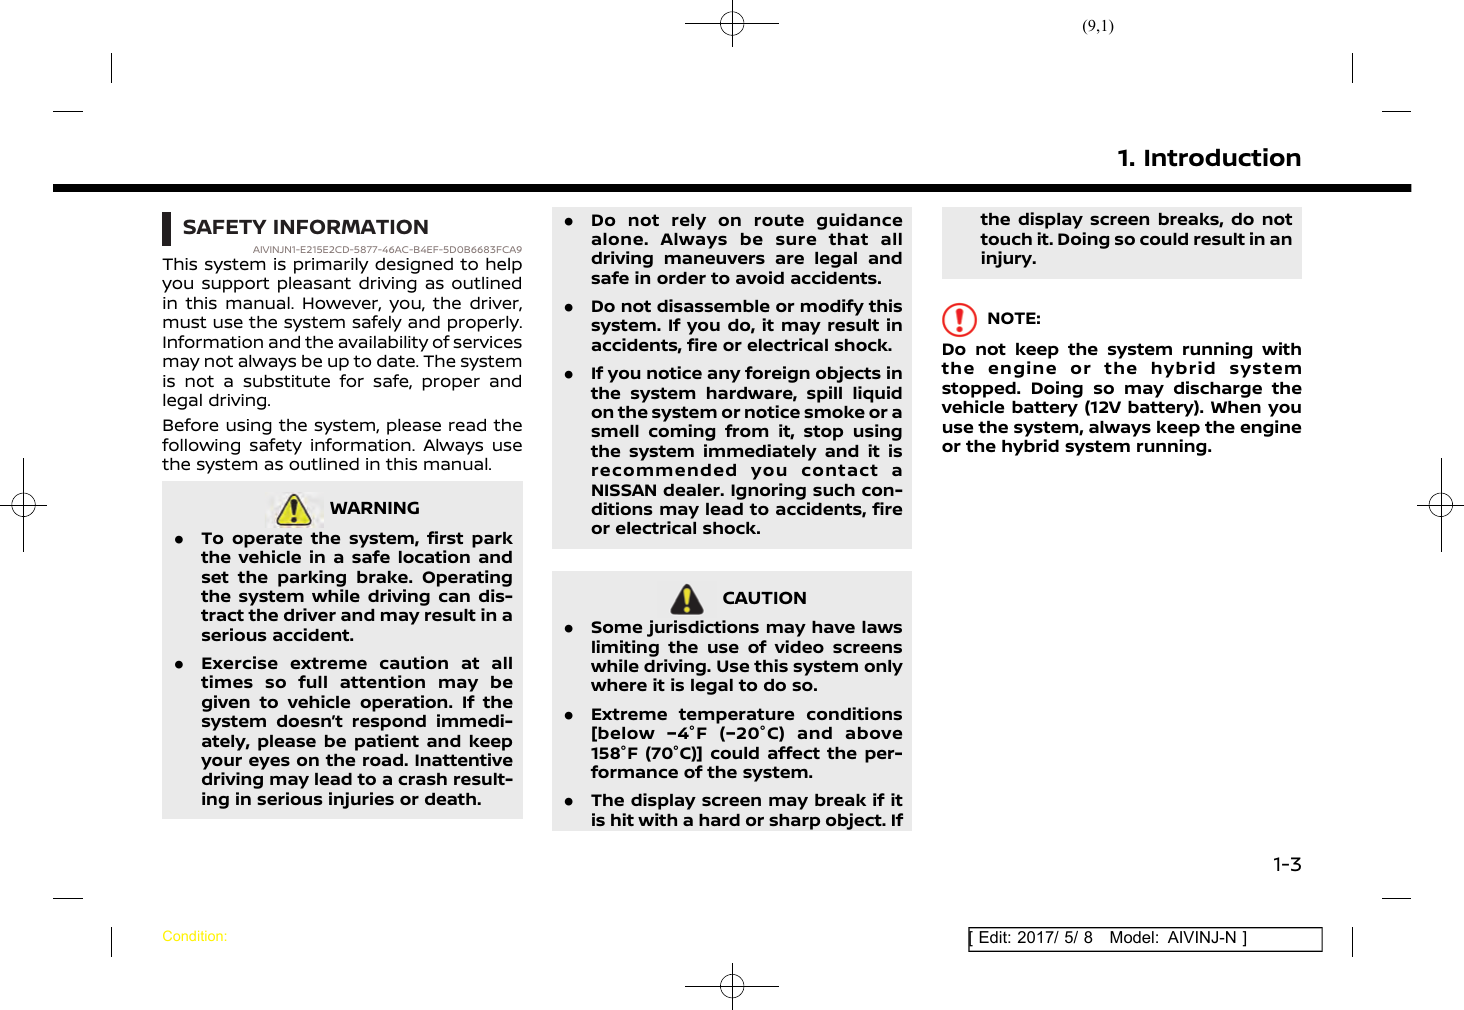 Page 9 of Robert Bosch Car Multimedia AIVICMFB0 Navigation System with Bluetooth and WLAN User Manual